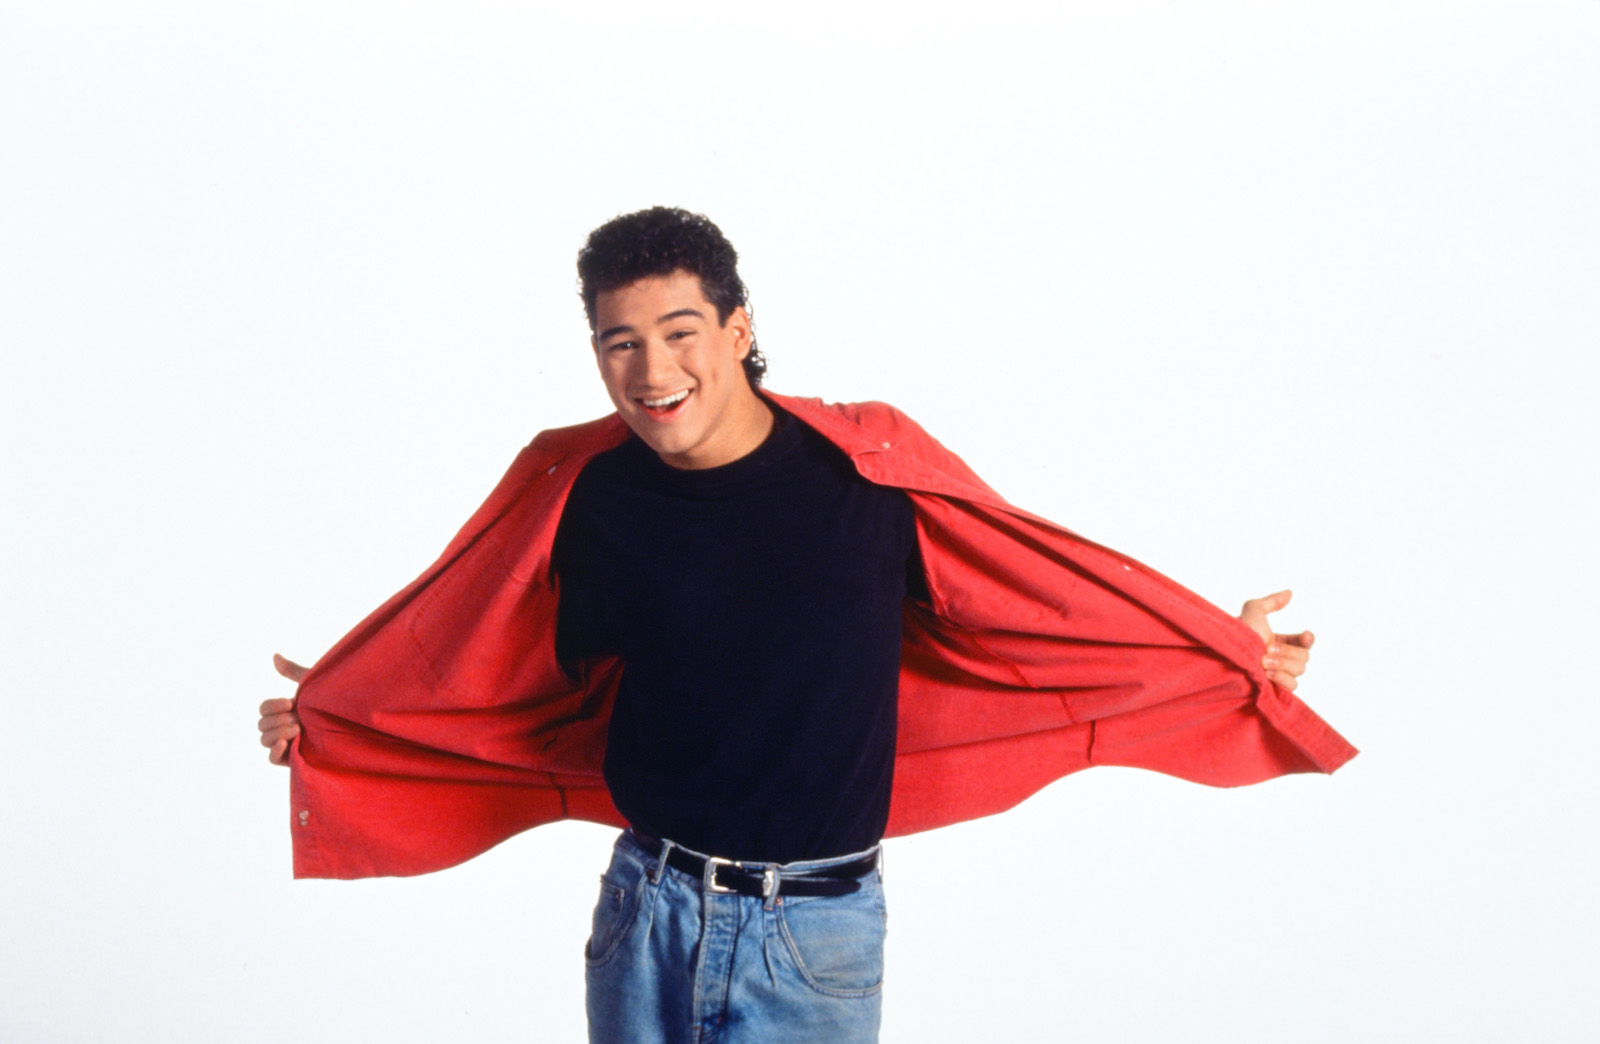 Mario Lopez’s ‘Saved by the Bell’ A.C. Slater Was Born From Boys and Girls Club of America – ‘Kept Me Out of Trouble’ [Exclusive]